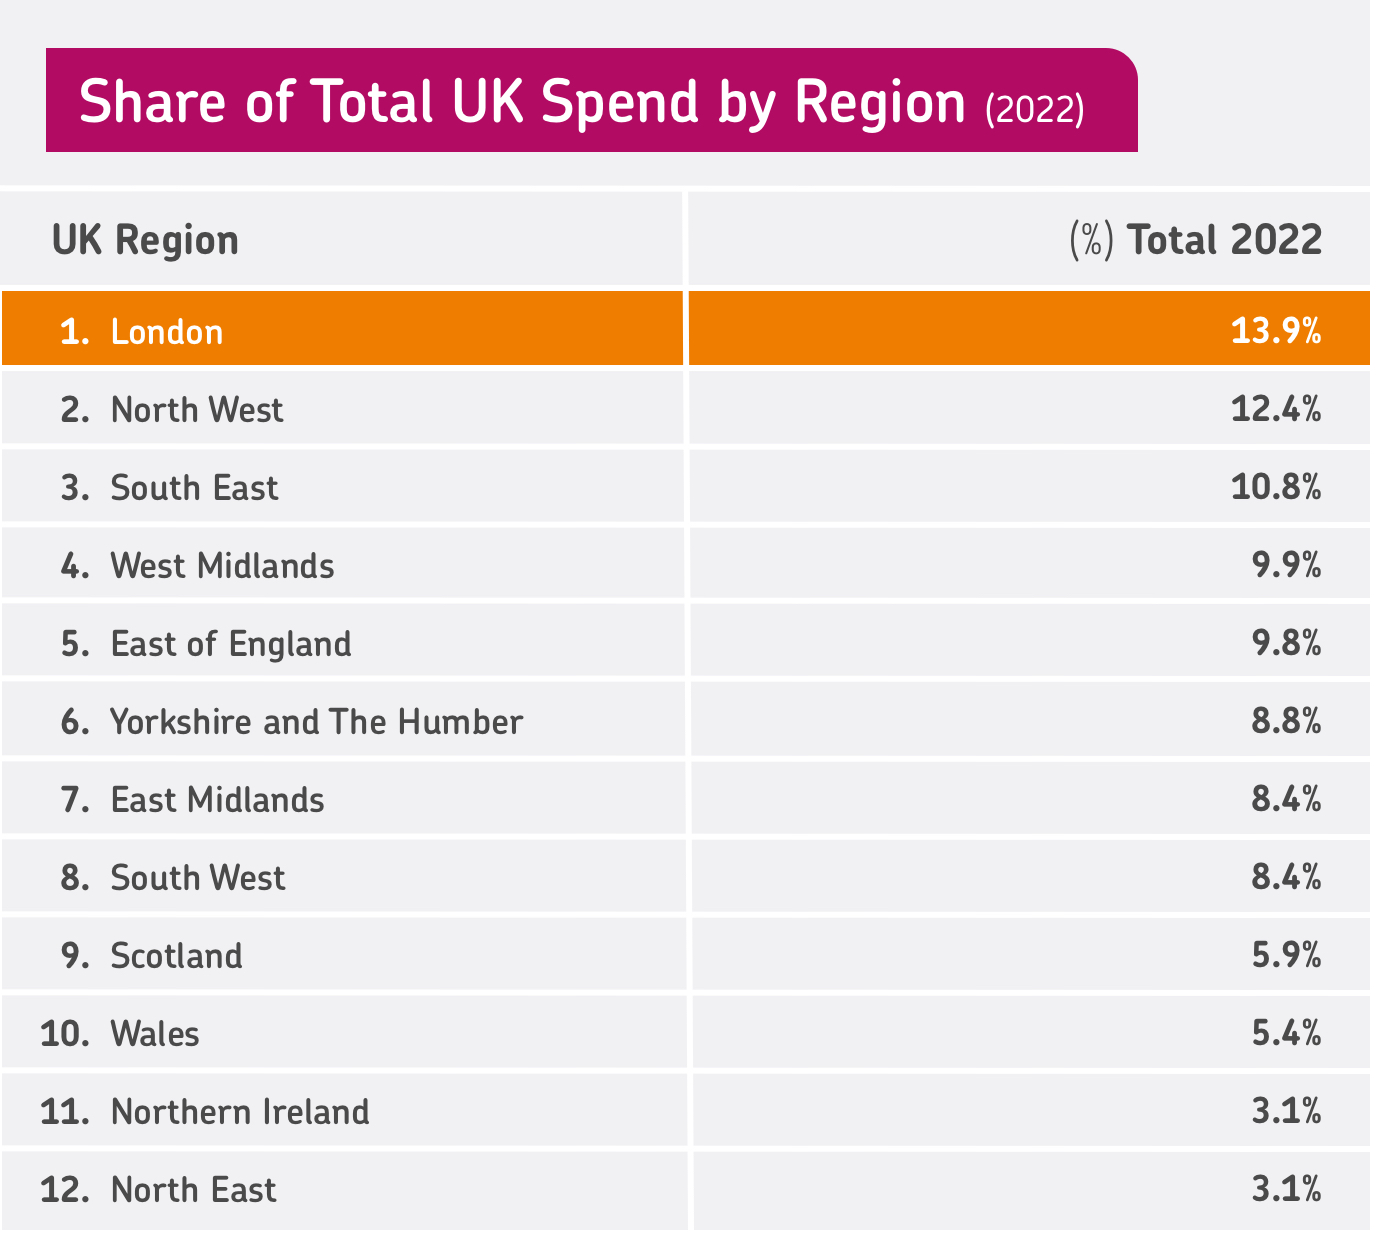 Table showing the share of total UK consumer spending belonging to each UK region in 2022, with London at the top